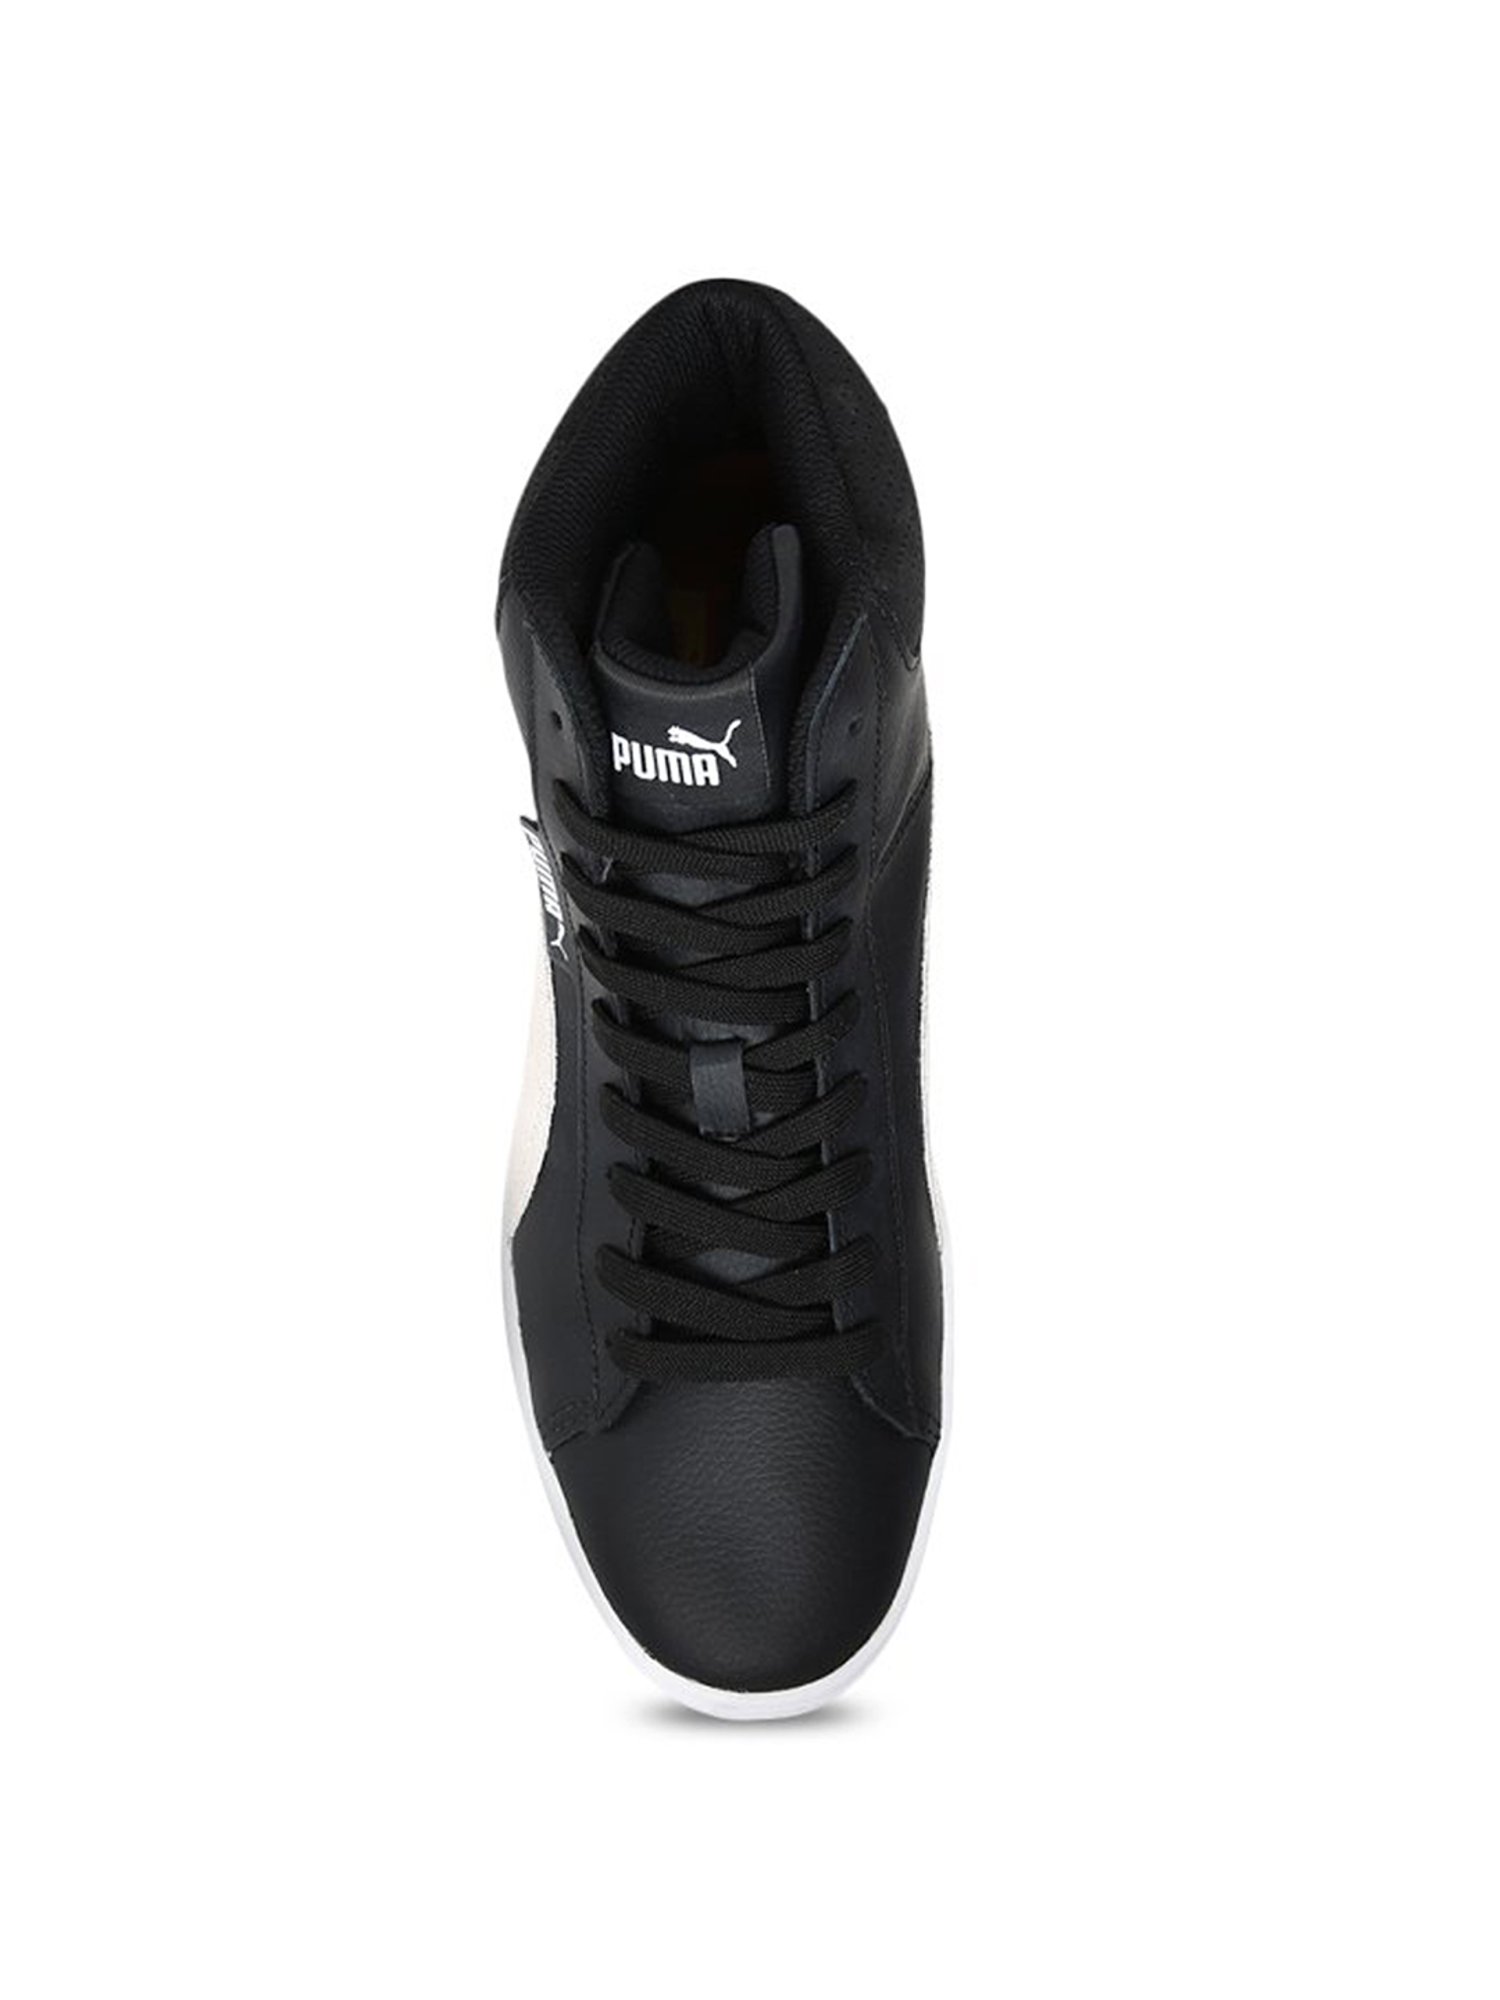 Buy Puma Rebound Mid Lite DP Classic Sneakers Shoes For Men (Black) Online  at Low Prices in India - Paytmmall.com